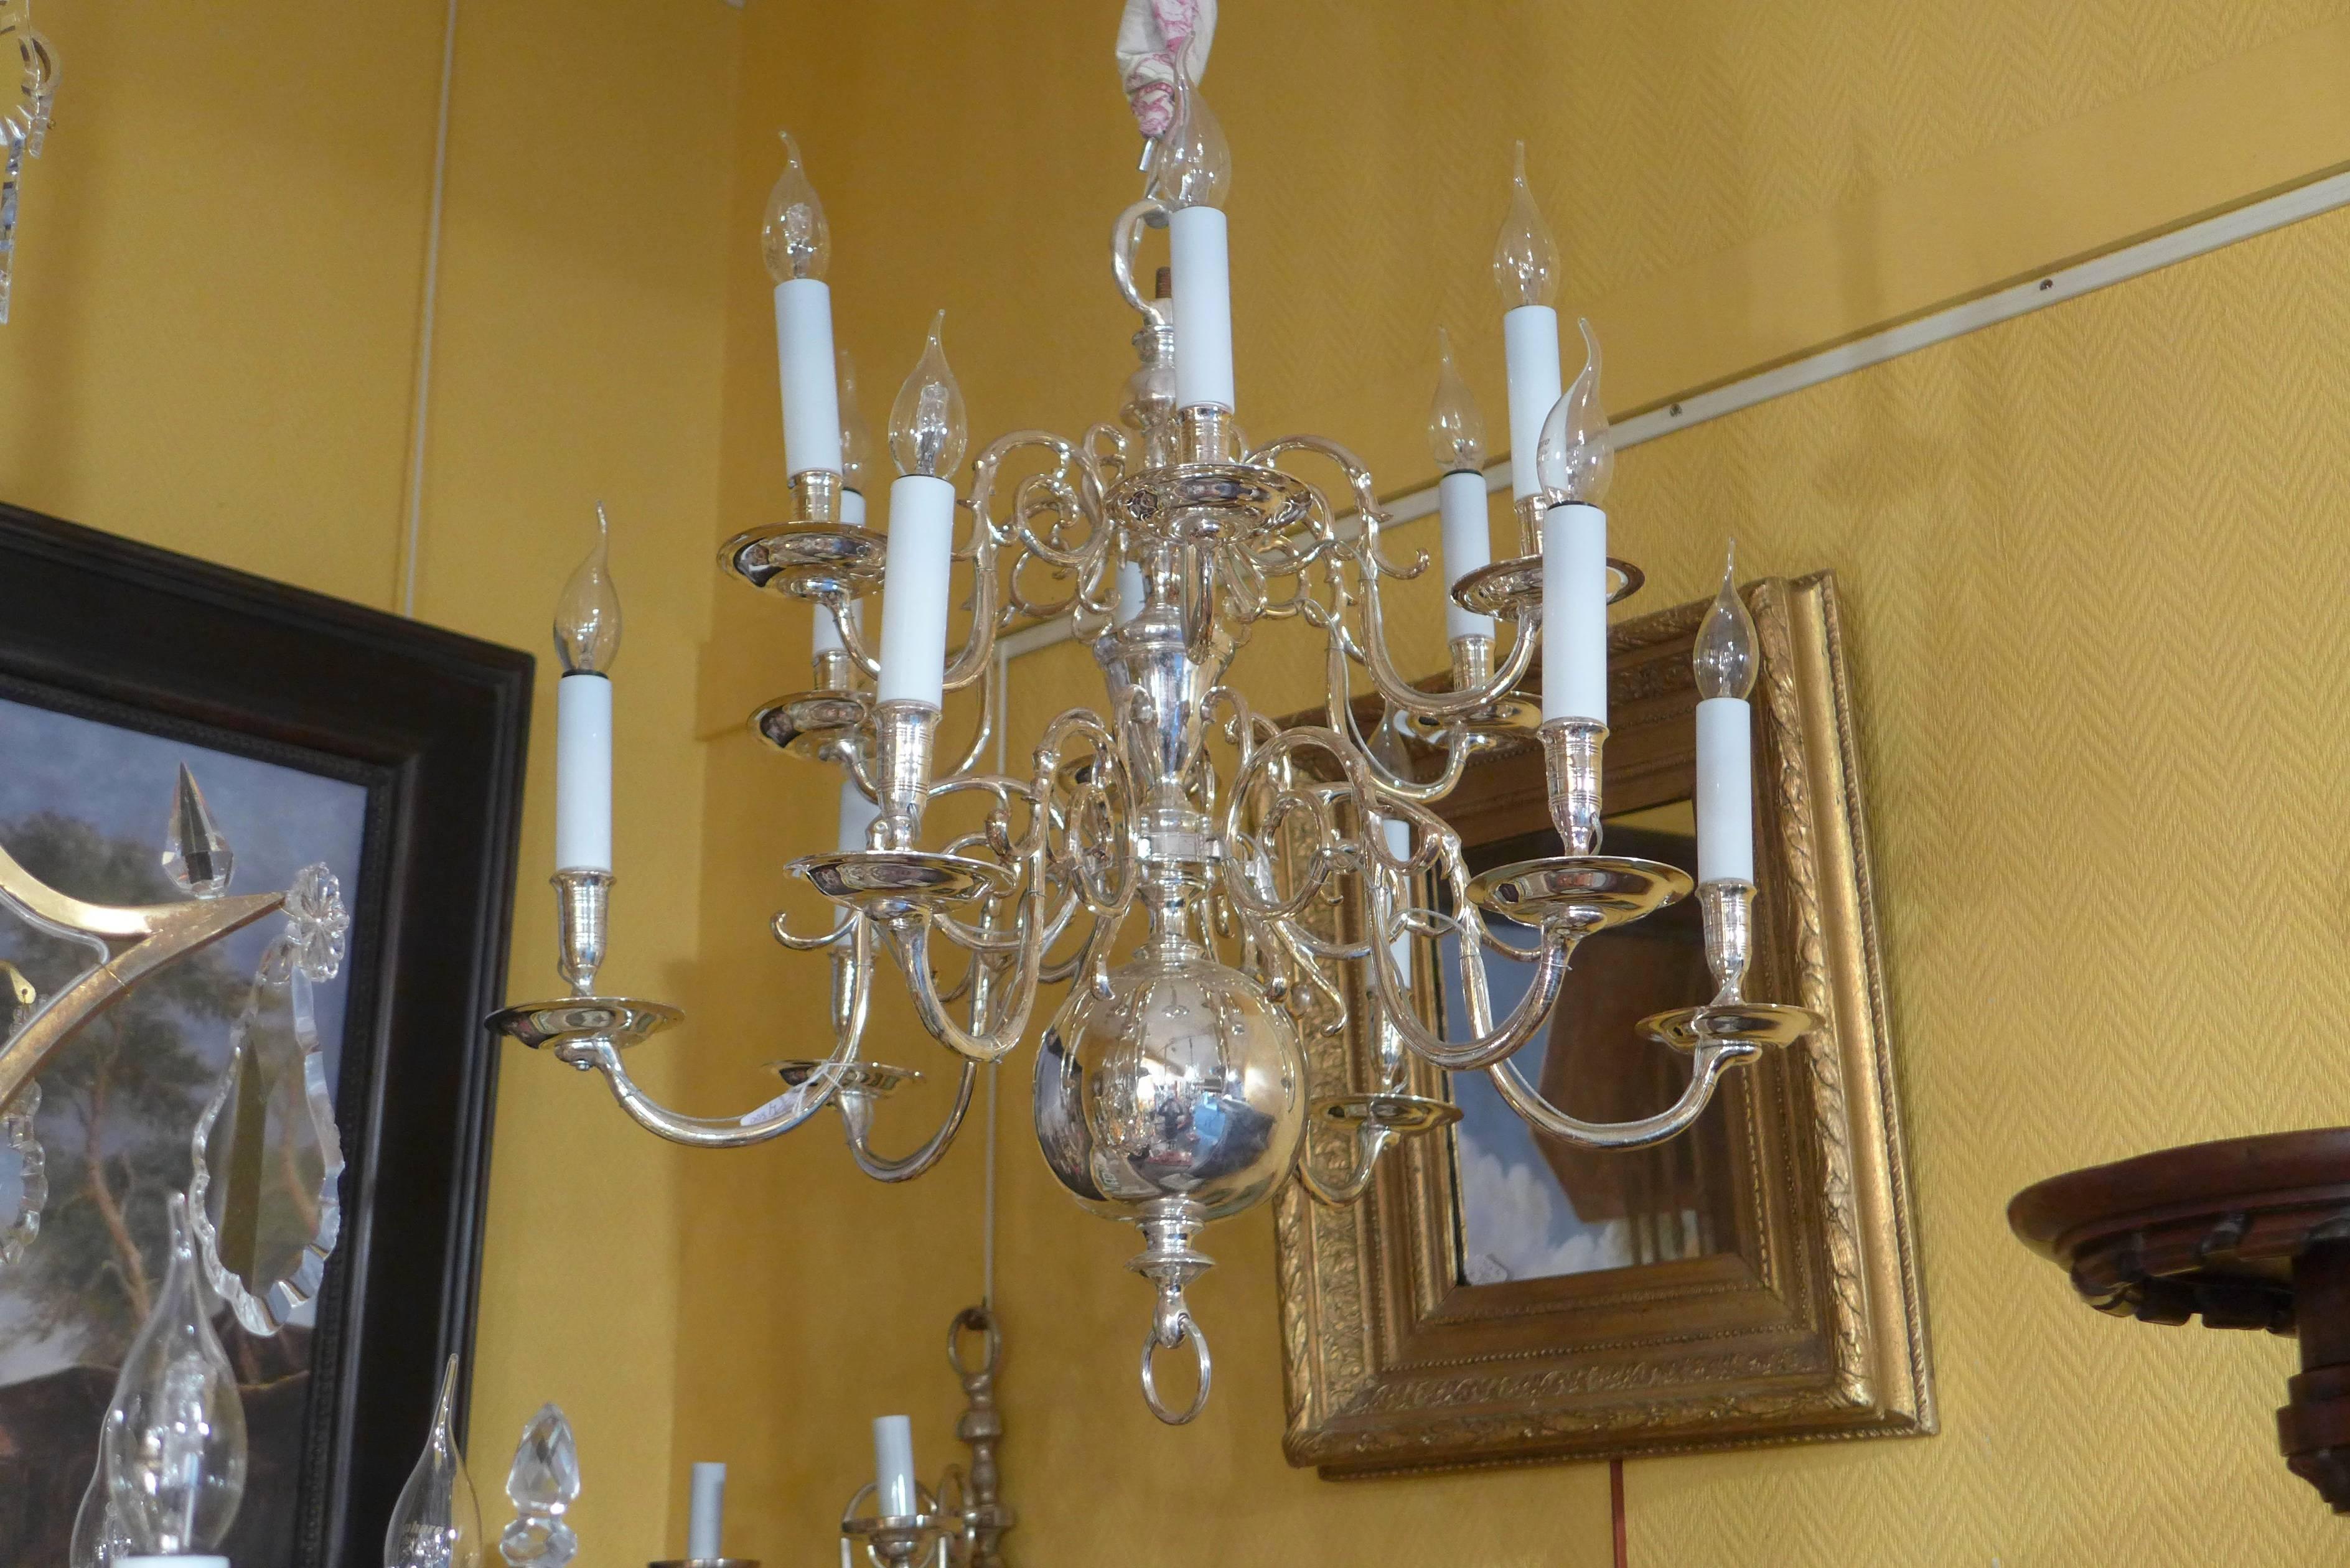 We are pleased to present you, a lovely late-18th-century Dutch baroque silver-plate chandelier, two-tier with twelve removable arm-lights. 

Our chandelier is in excellent condition. It polished and silvered professionally.
It professionally wired